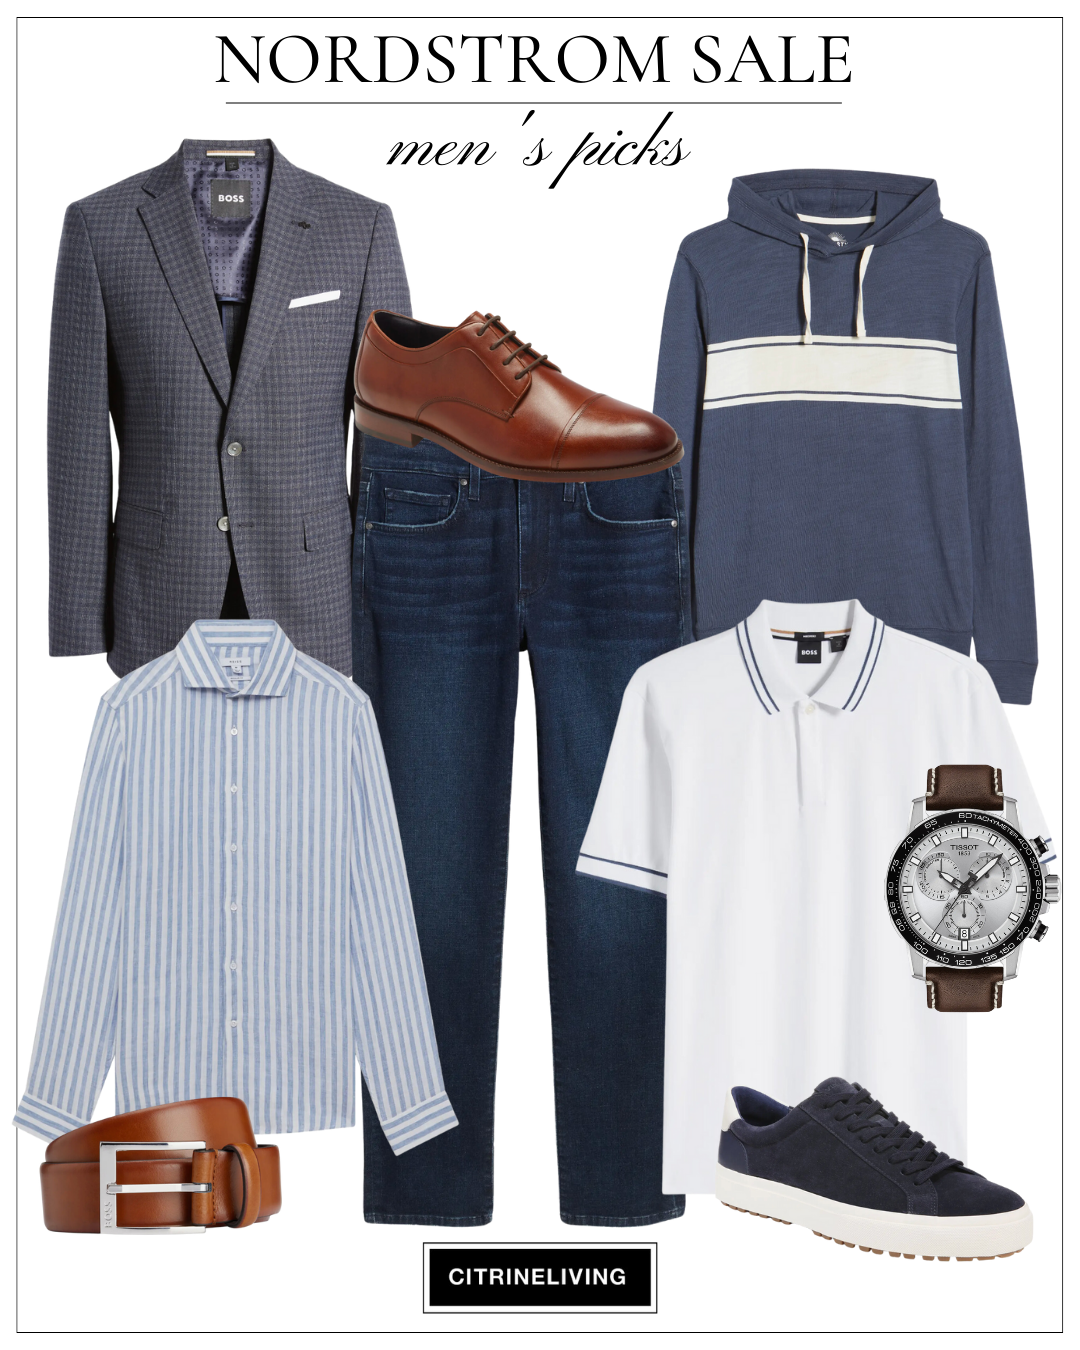 Mens fashion from Nordstrom